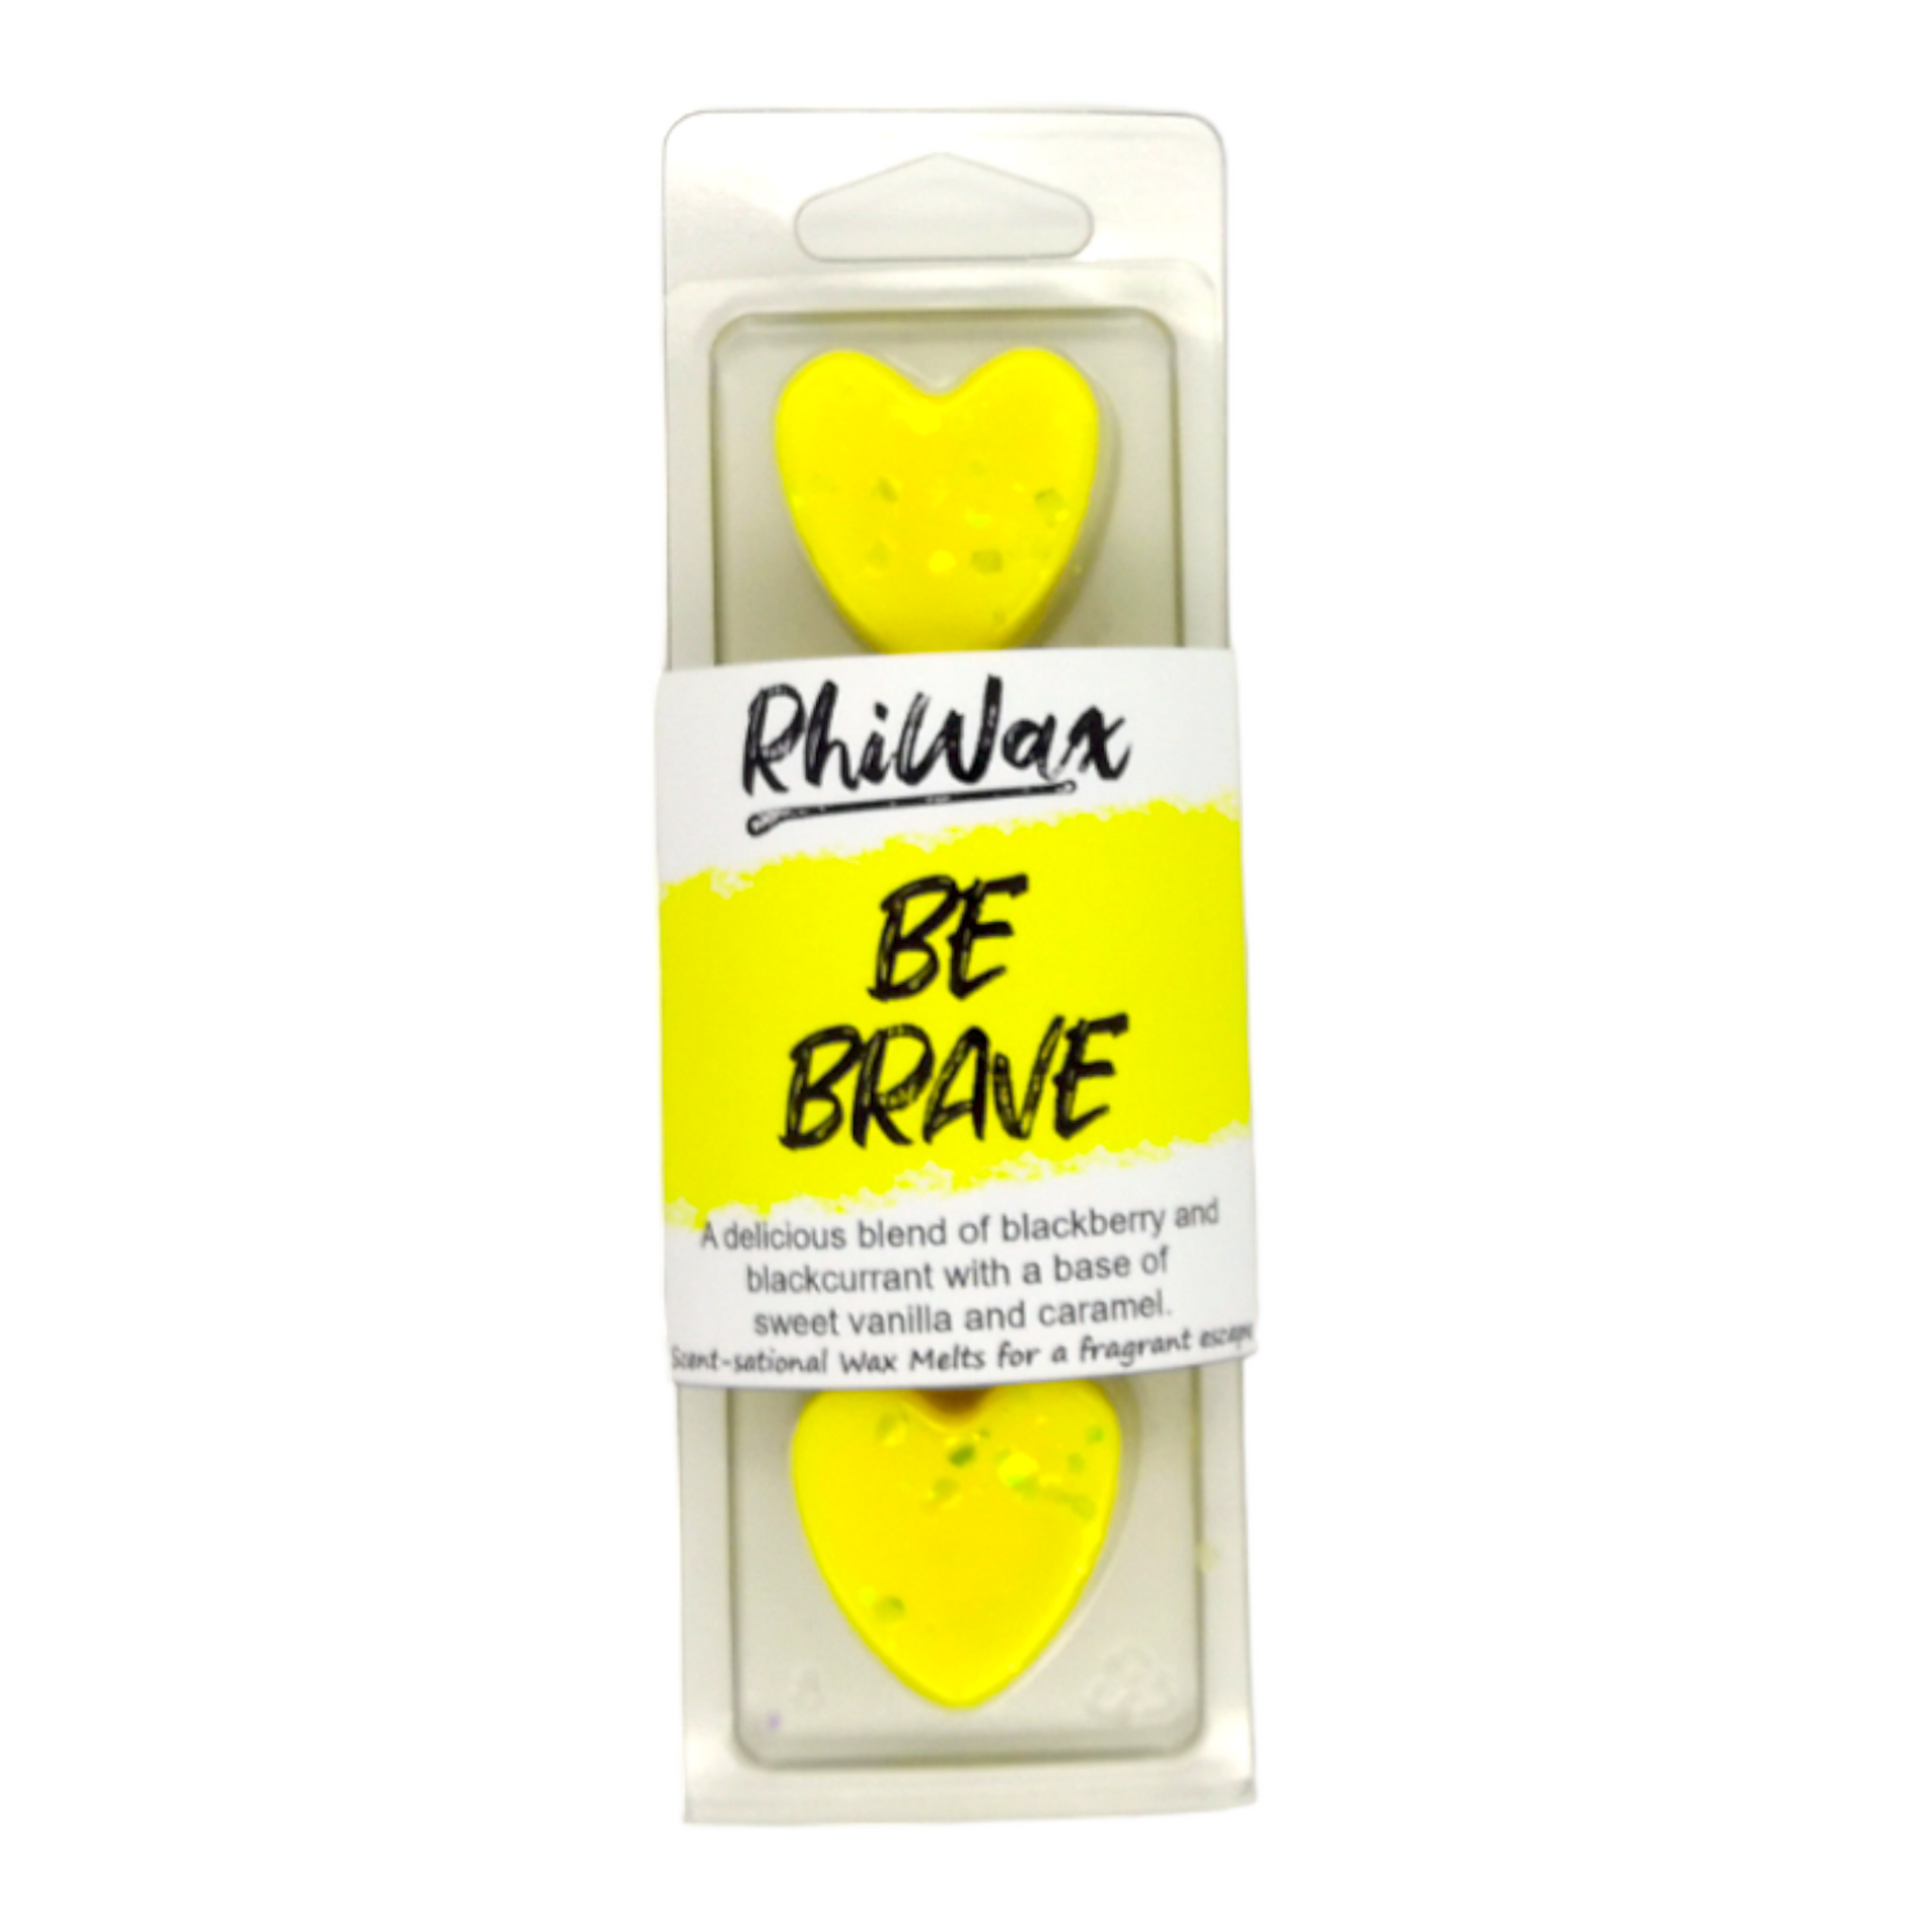 One RhiWax Be Brave wax melt 4 heart clamshell. Wax melts are yellow hearts with yellow glitter.